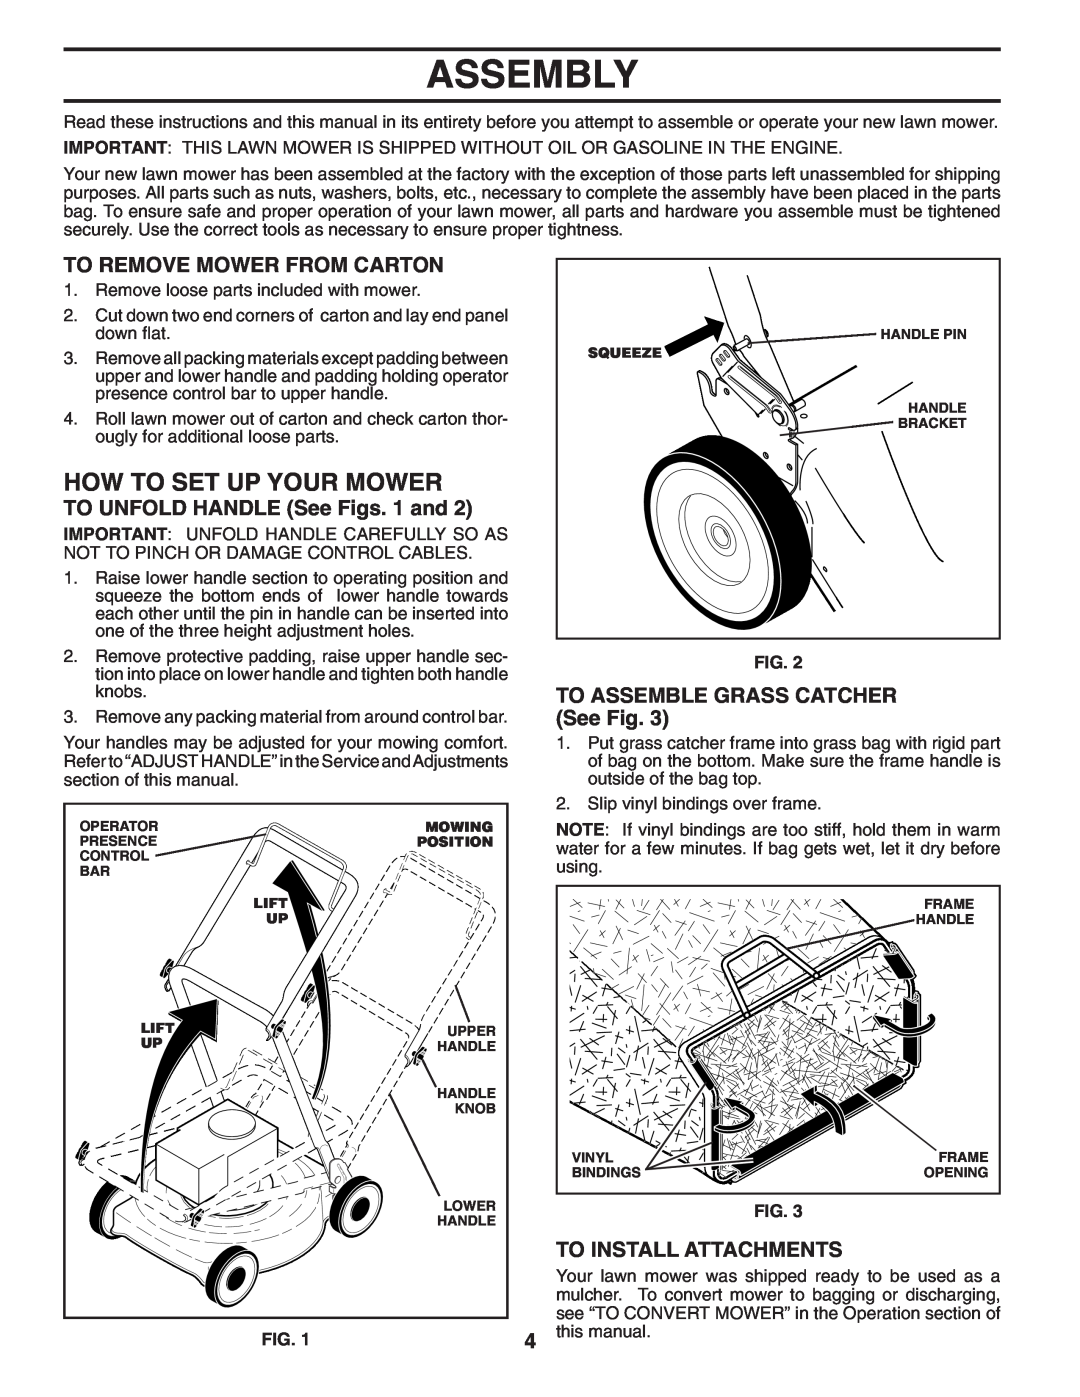 Husqvarna 87521RSX Assembly, How To Set Up Your Mower, To Remove Mower From Carton, TO UNFOLD HANDLE See Figs. 1 and 